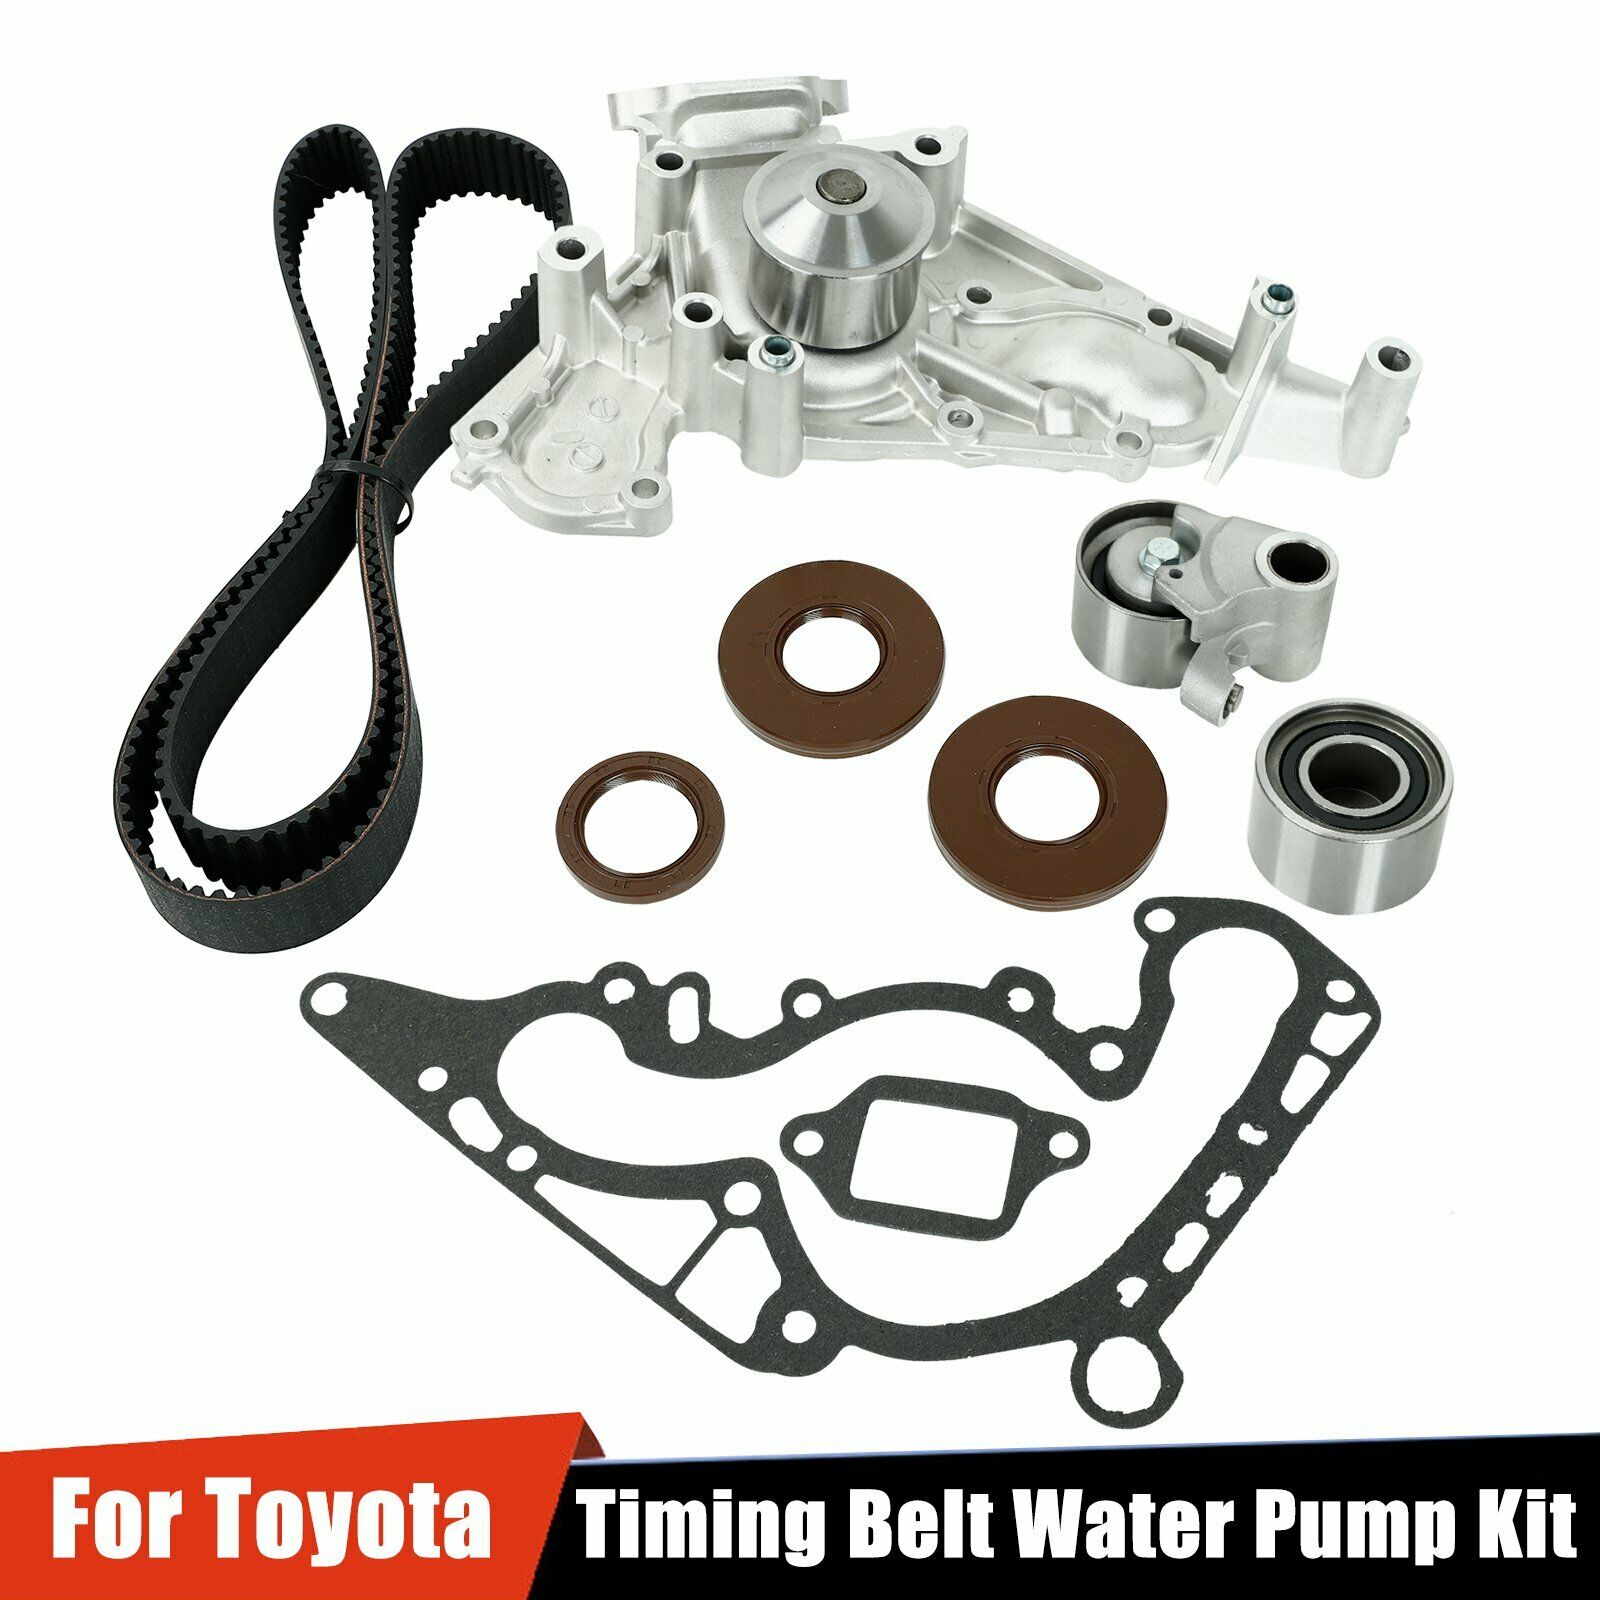 Timing Belt Water Pump Kit for 98-07 Lexus Toyota Tundra Sequoia 4.7 –  Dynamic Performance Tuning